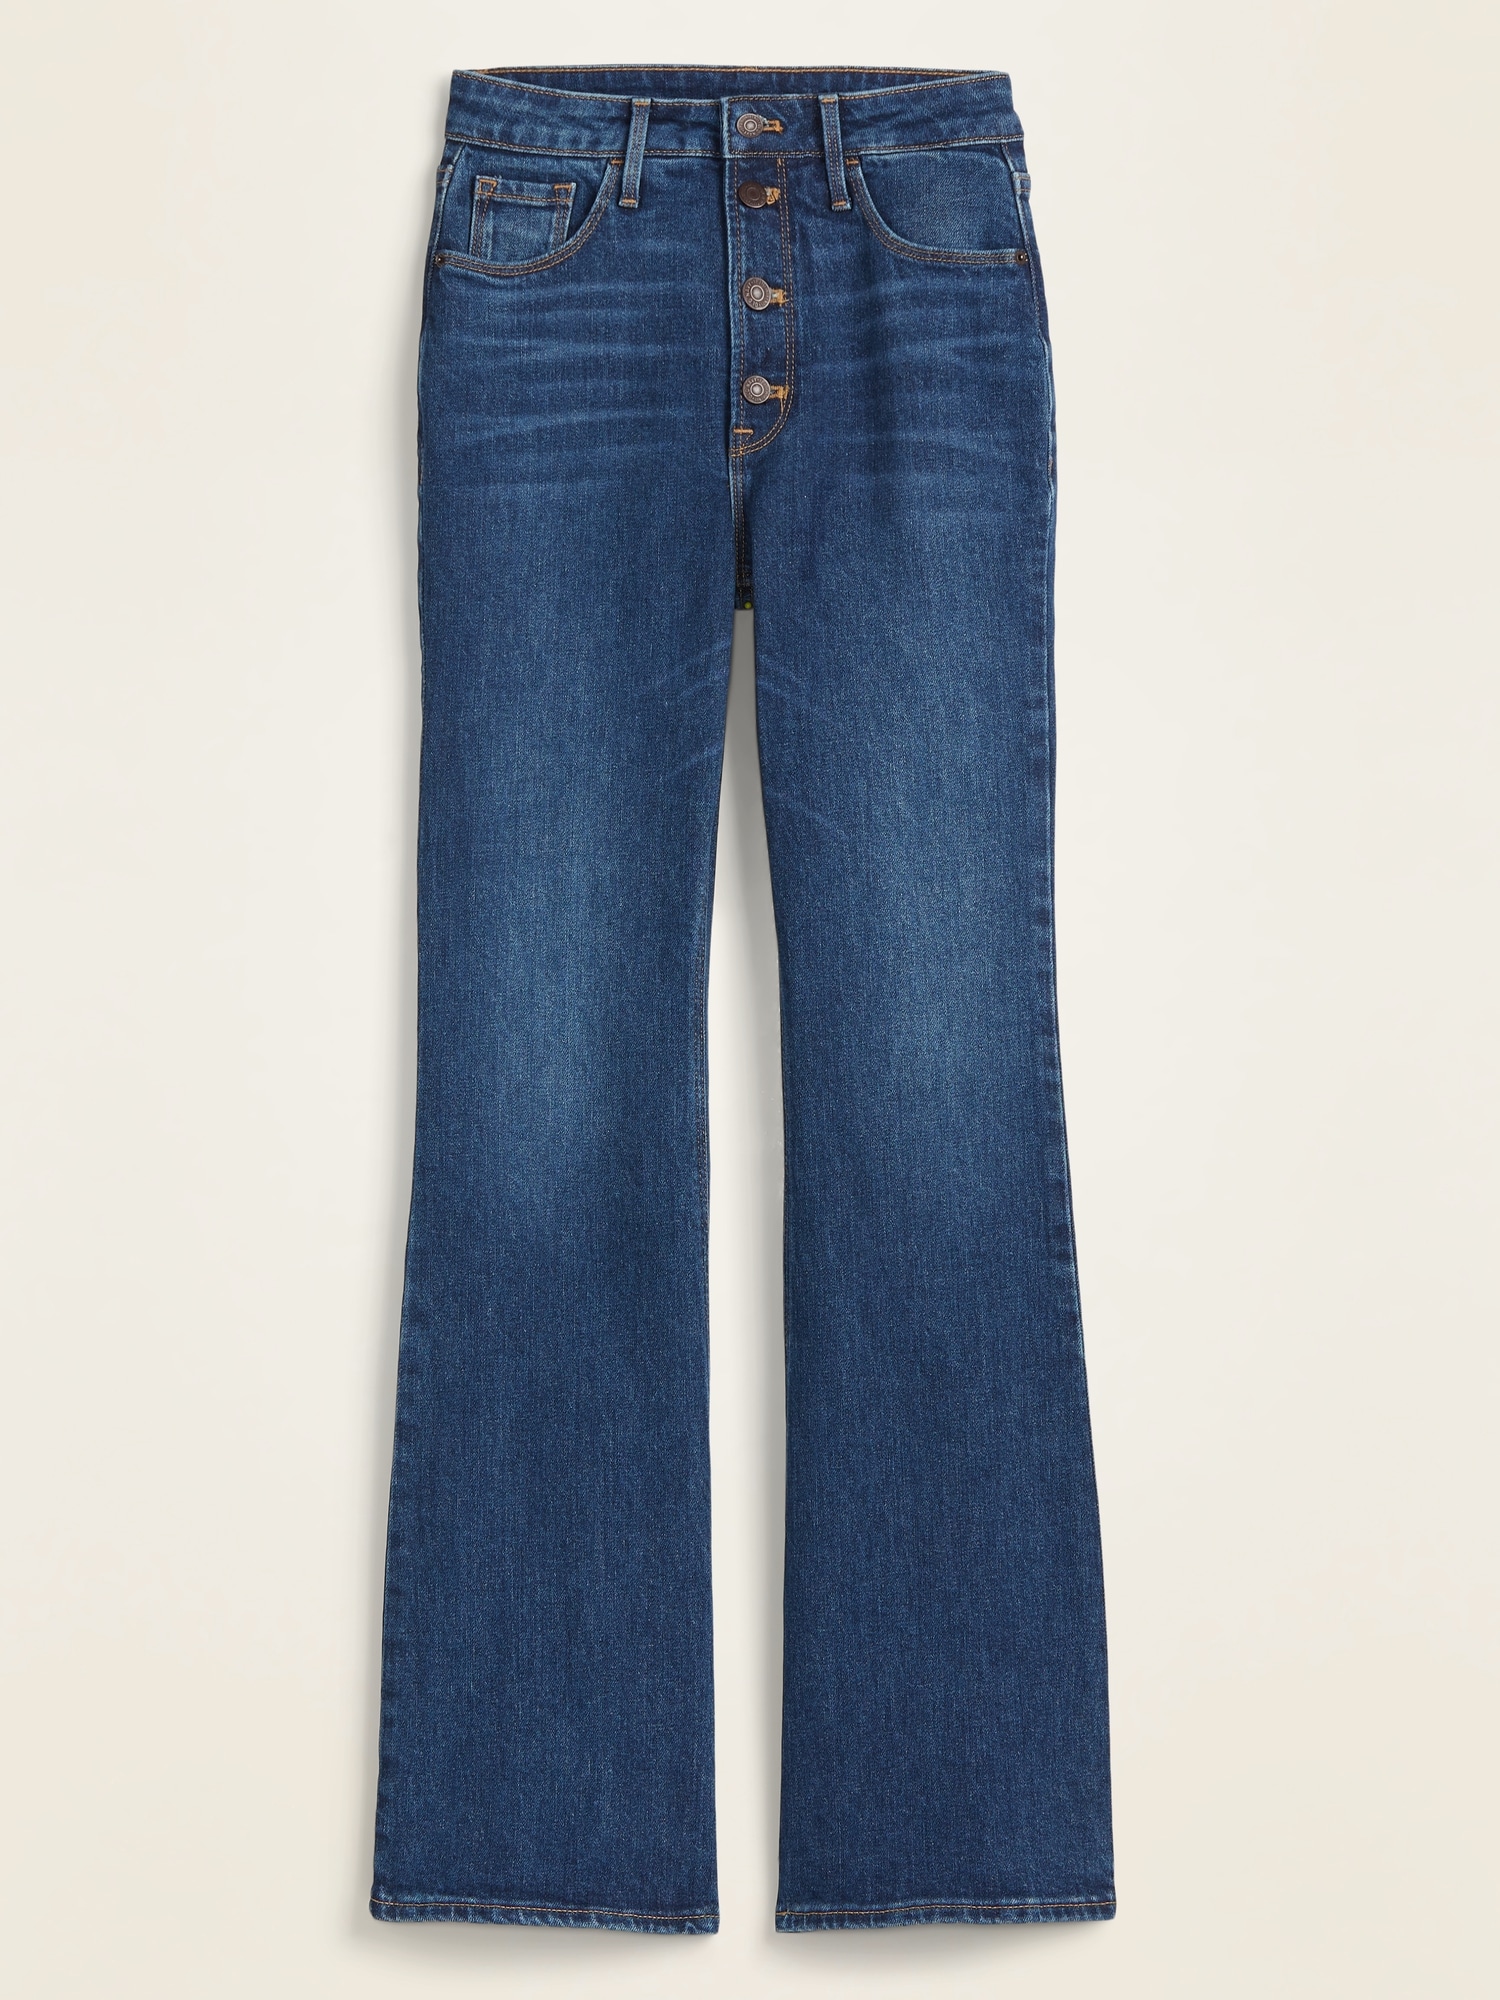 old navy jeans high rise